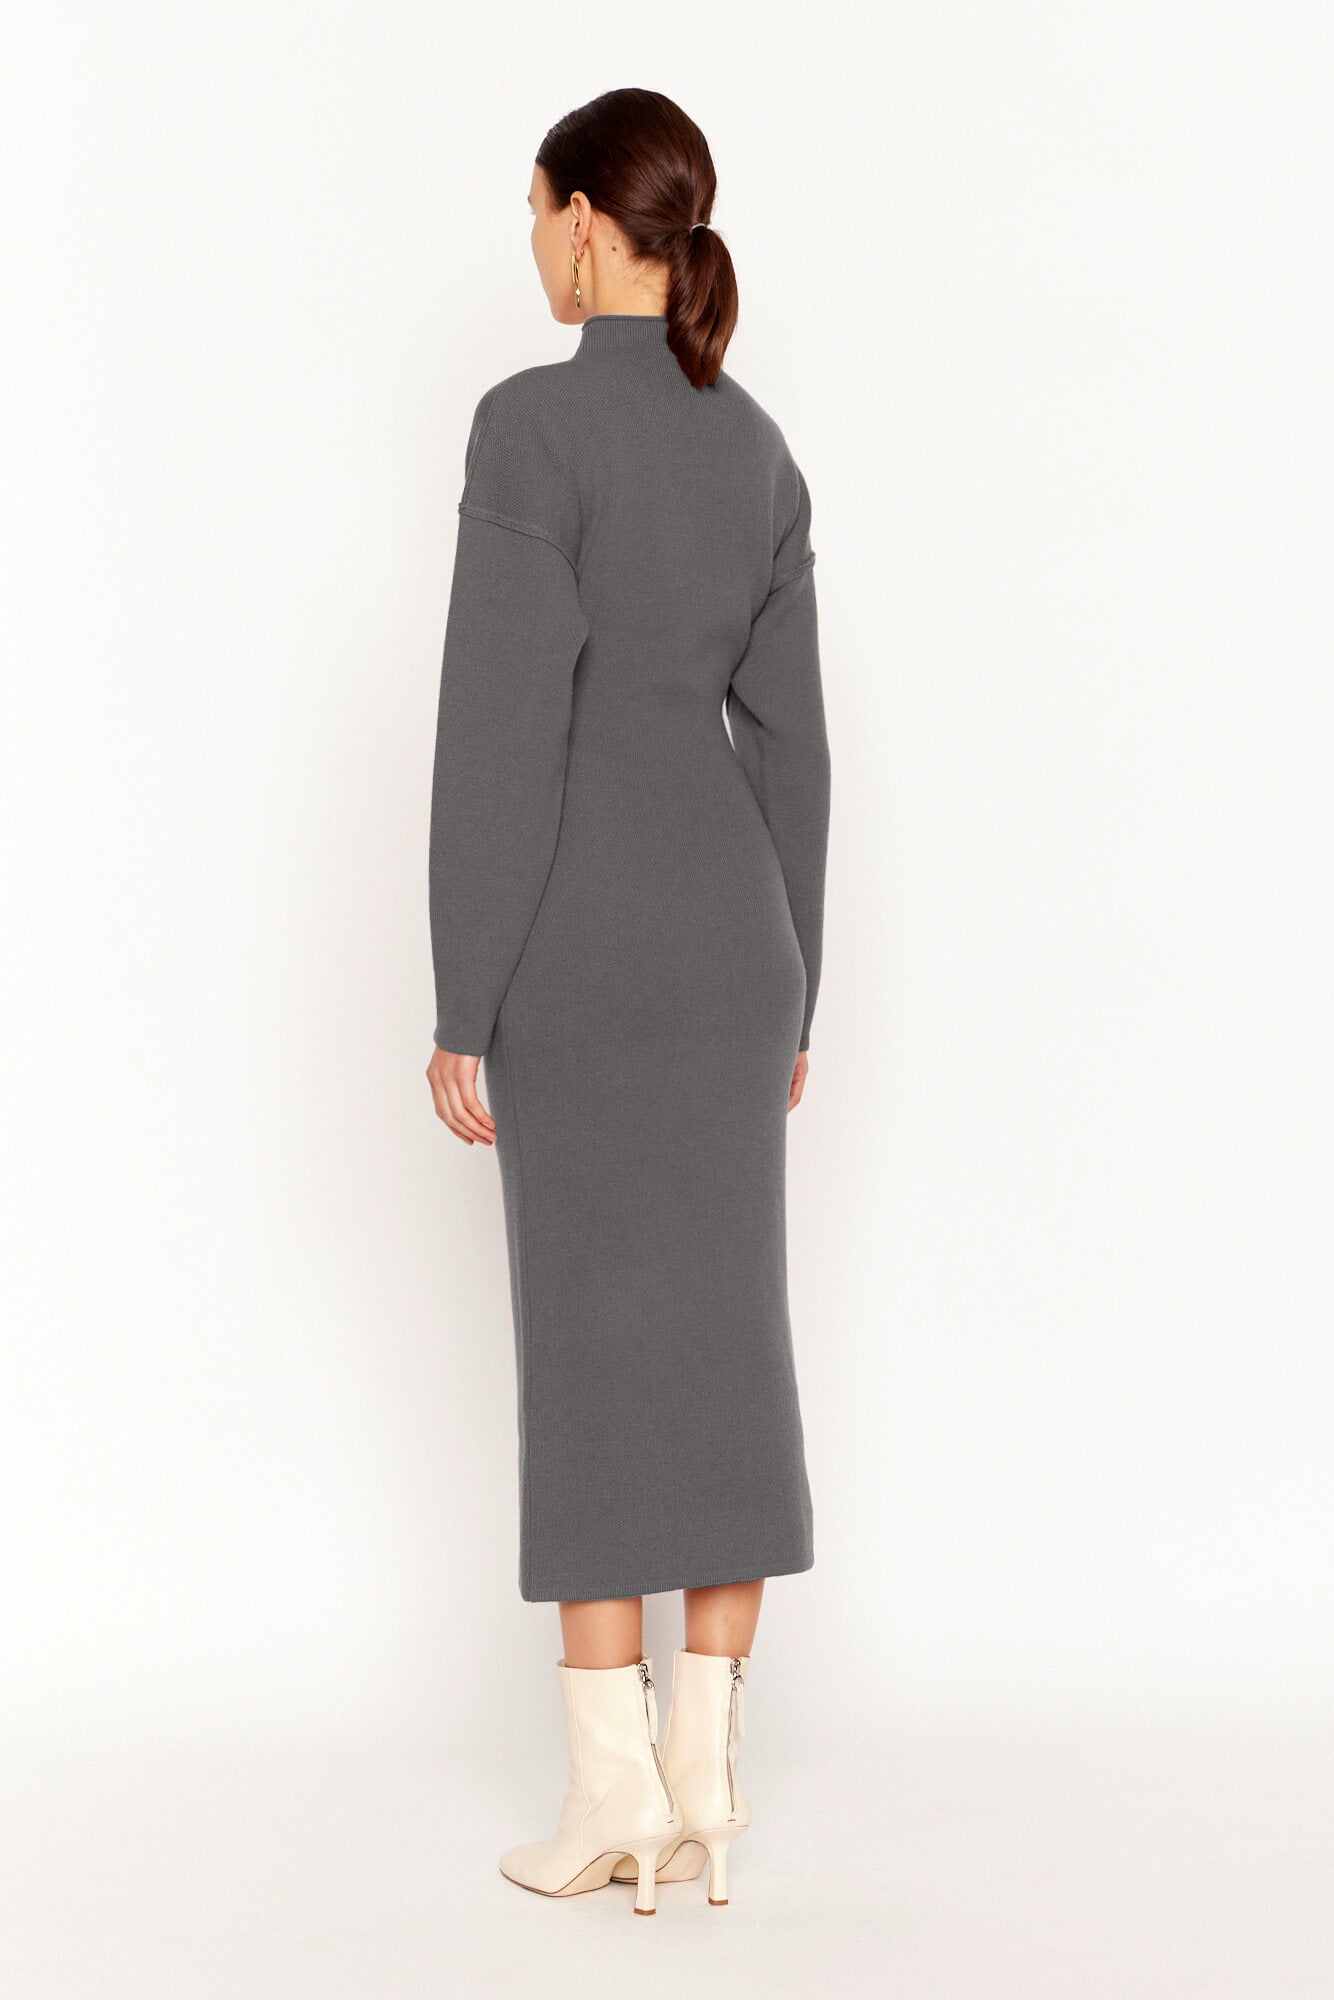 Heather Grey Wool and Cashmere Midi Dress with High Neck